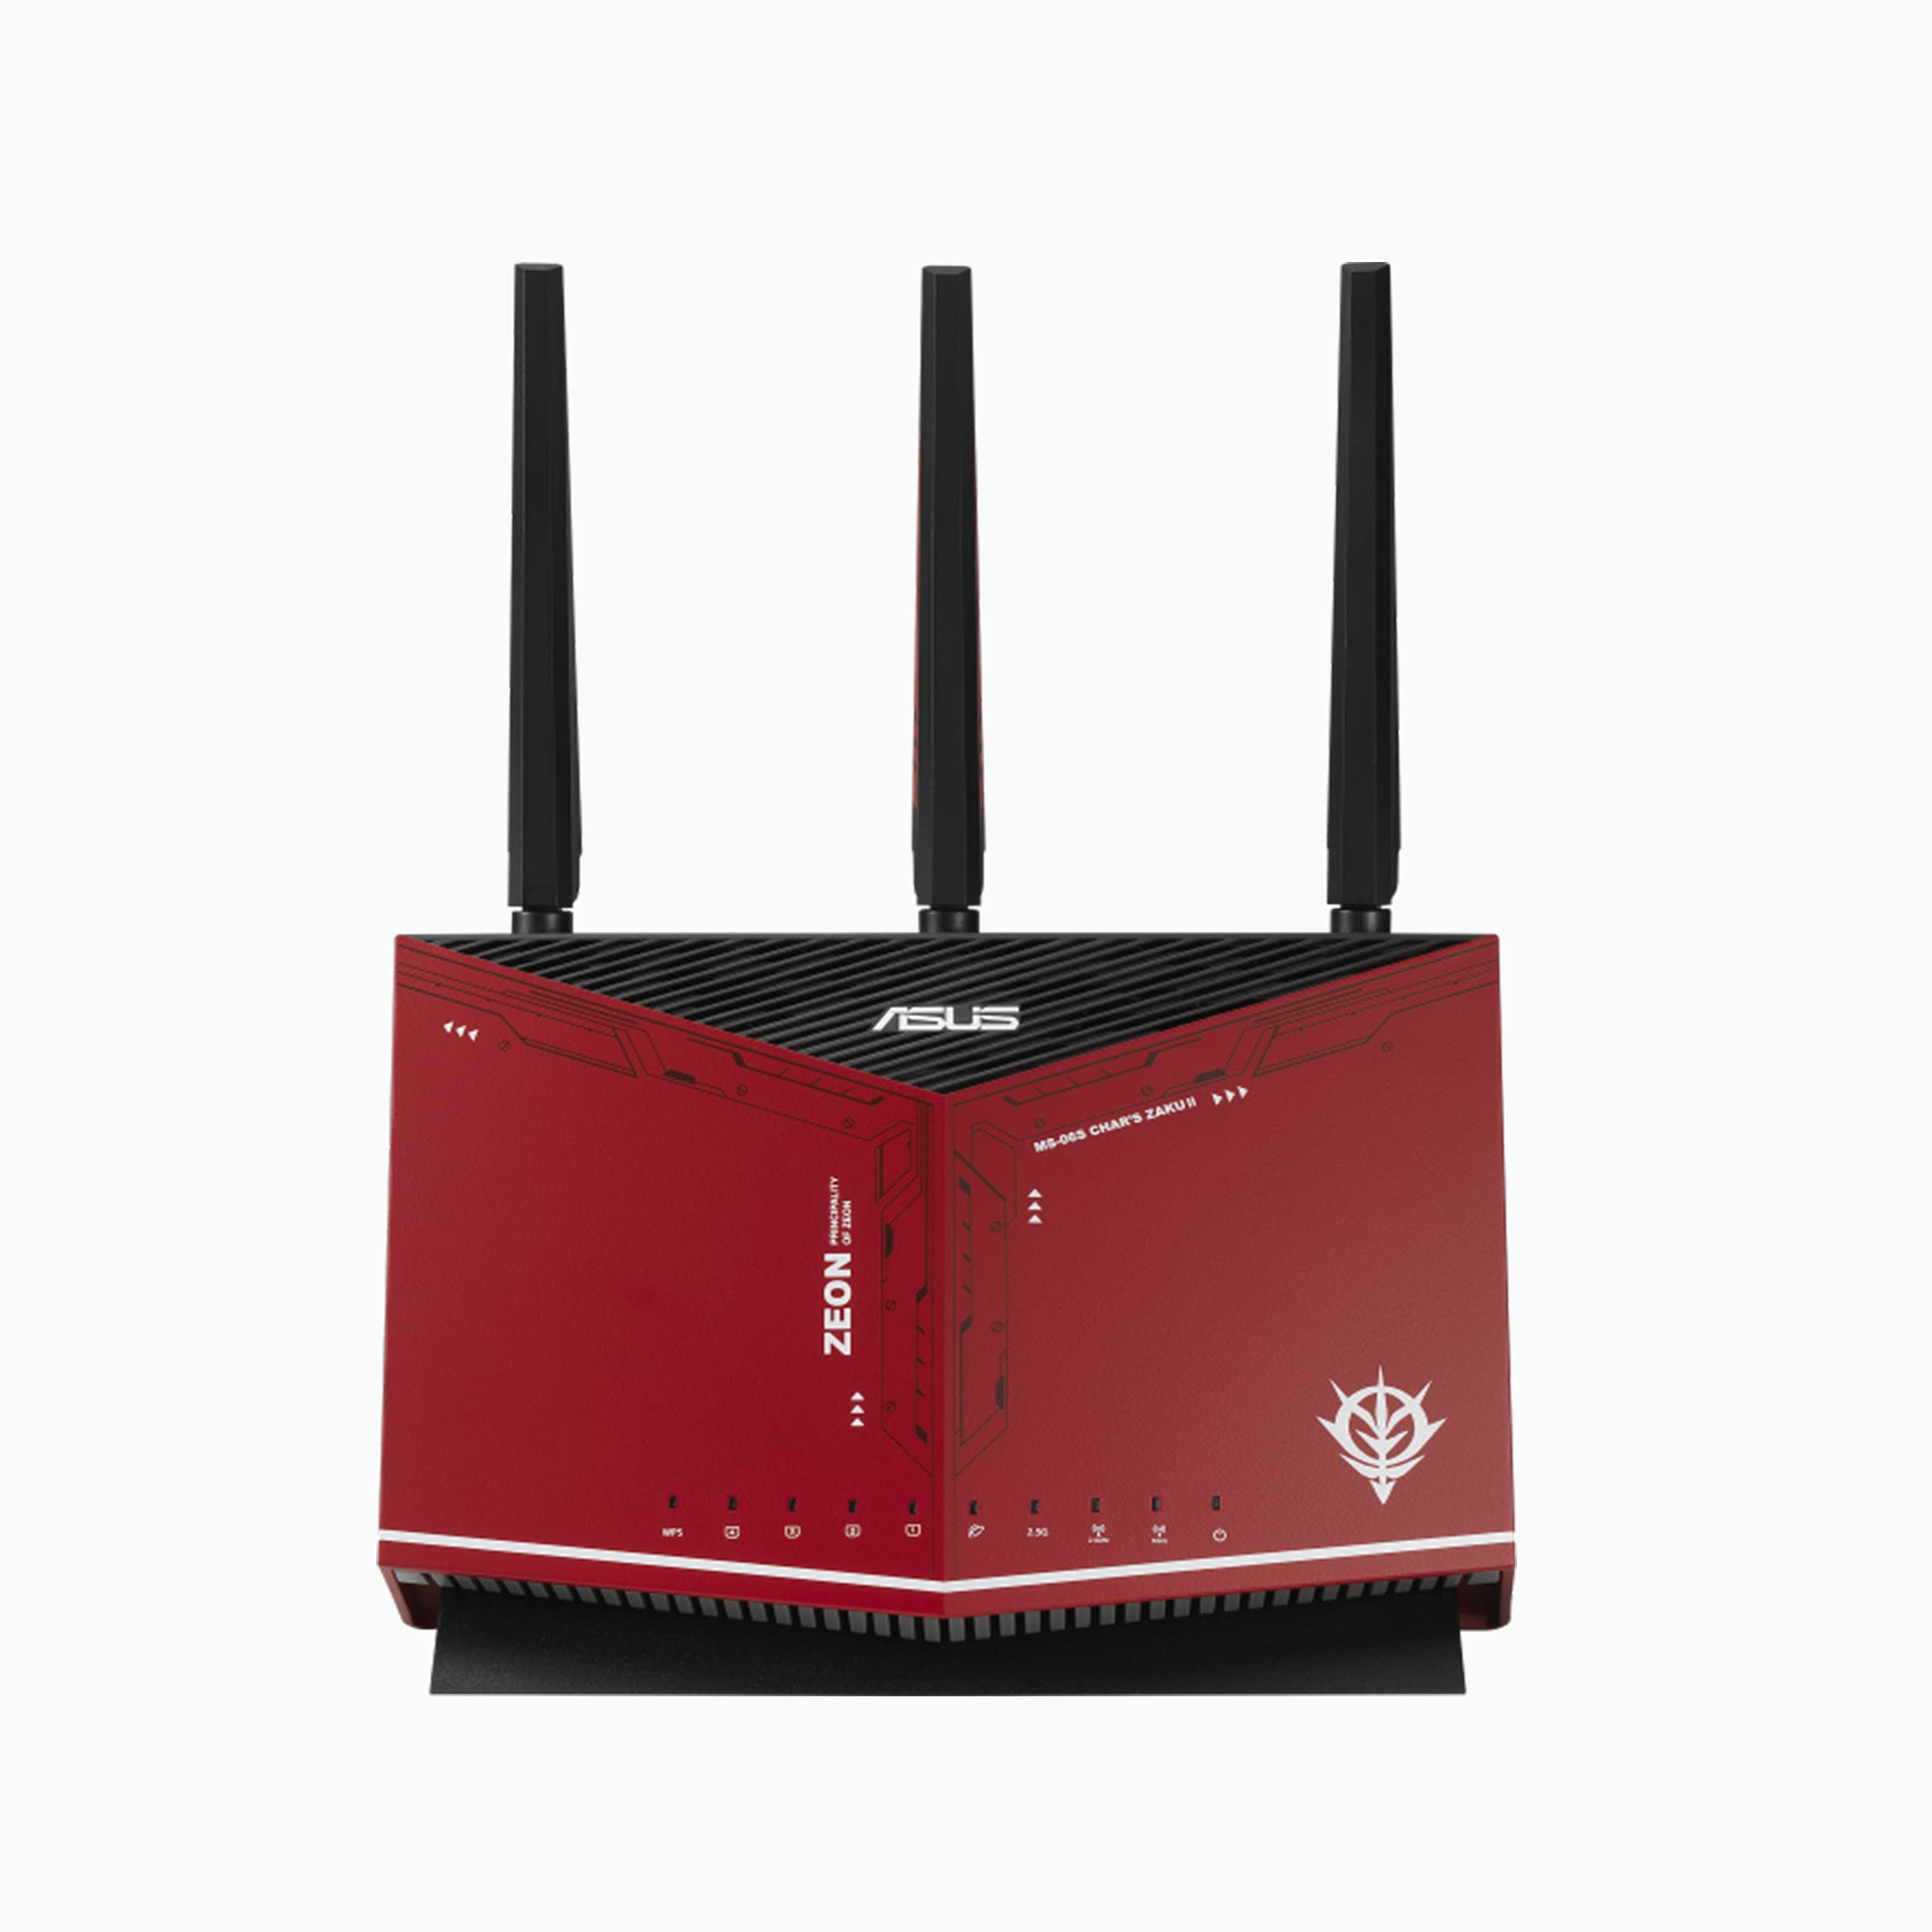 Asus AX5700 WiFi 6 Gaming Router (RT-AX86U) - Dual Band Gigabit Wireless Internet Router